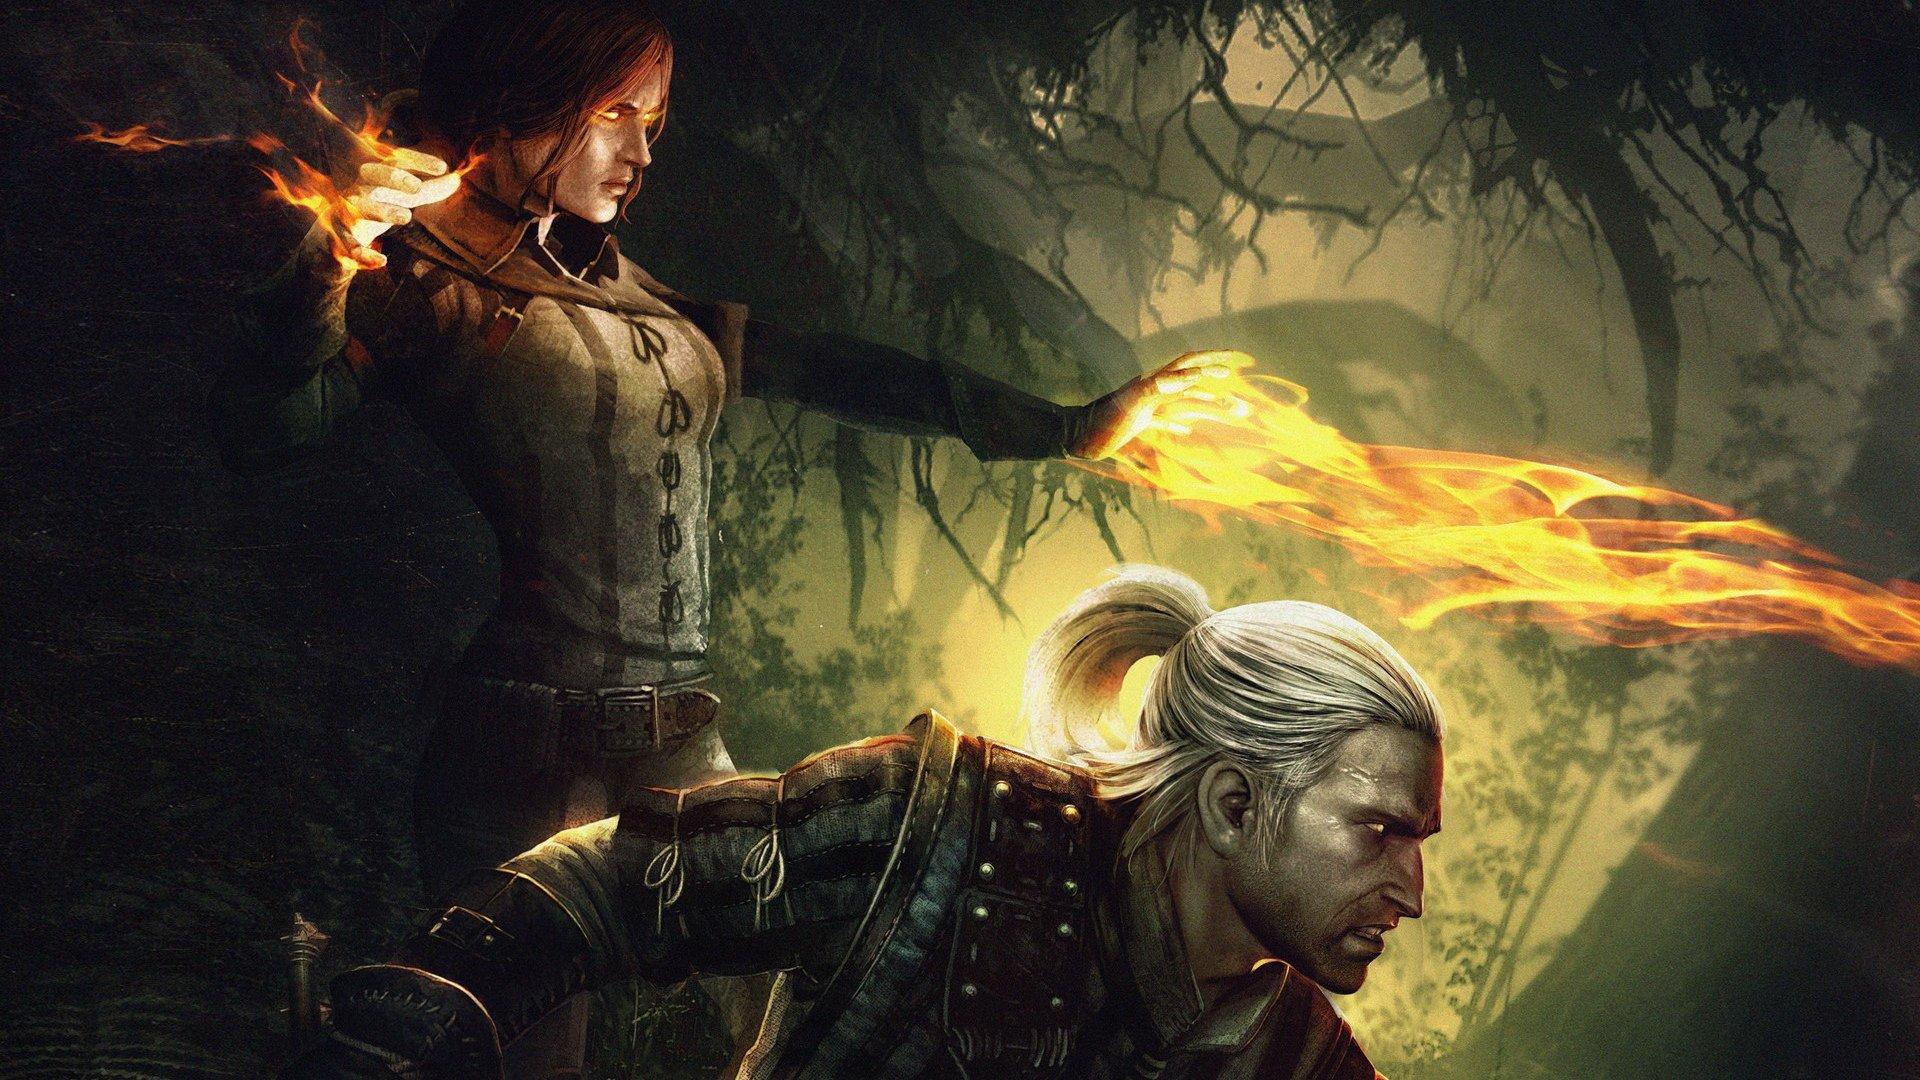 Video Game The Witcher 2: Assassins Of Kings HD Wallpaper by